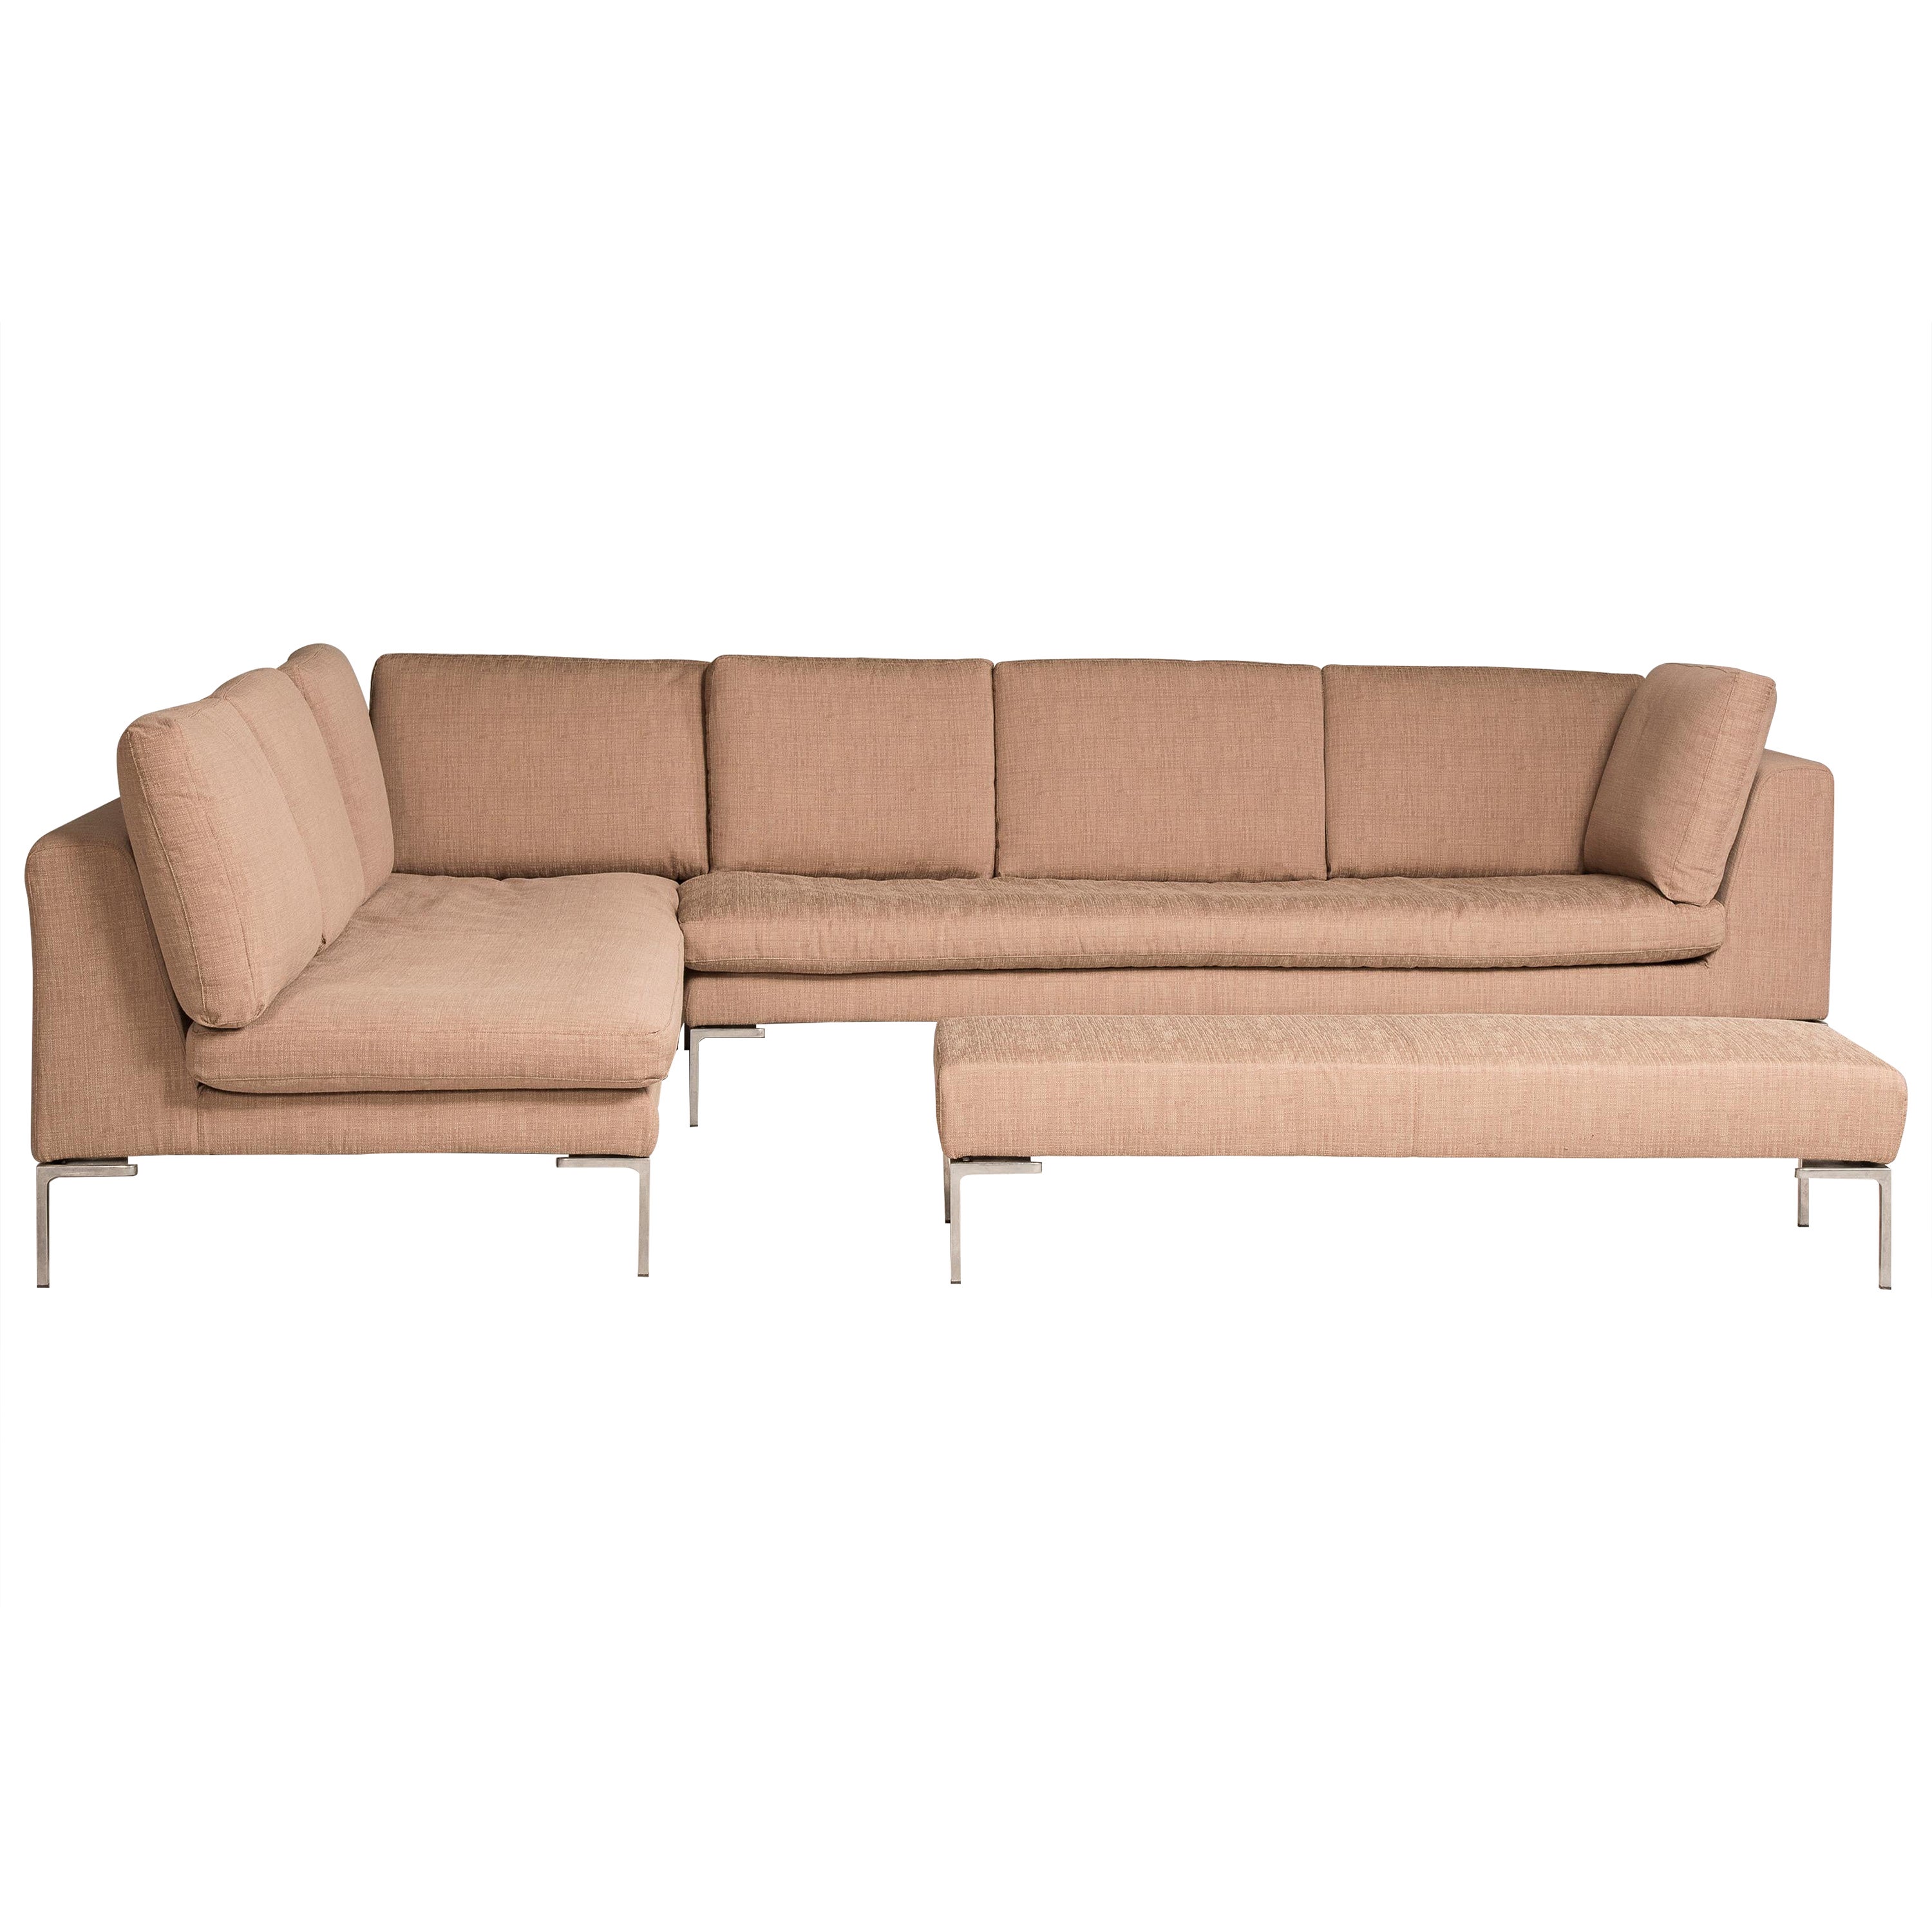 Charles Model by Antonio Citterio for B&B Italia Beige Color Sofà and Bench Set